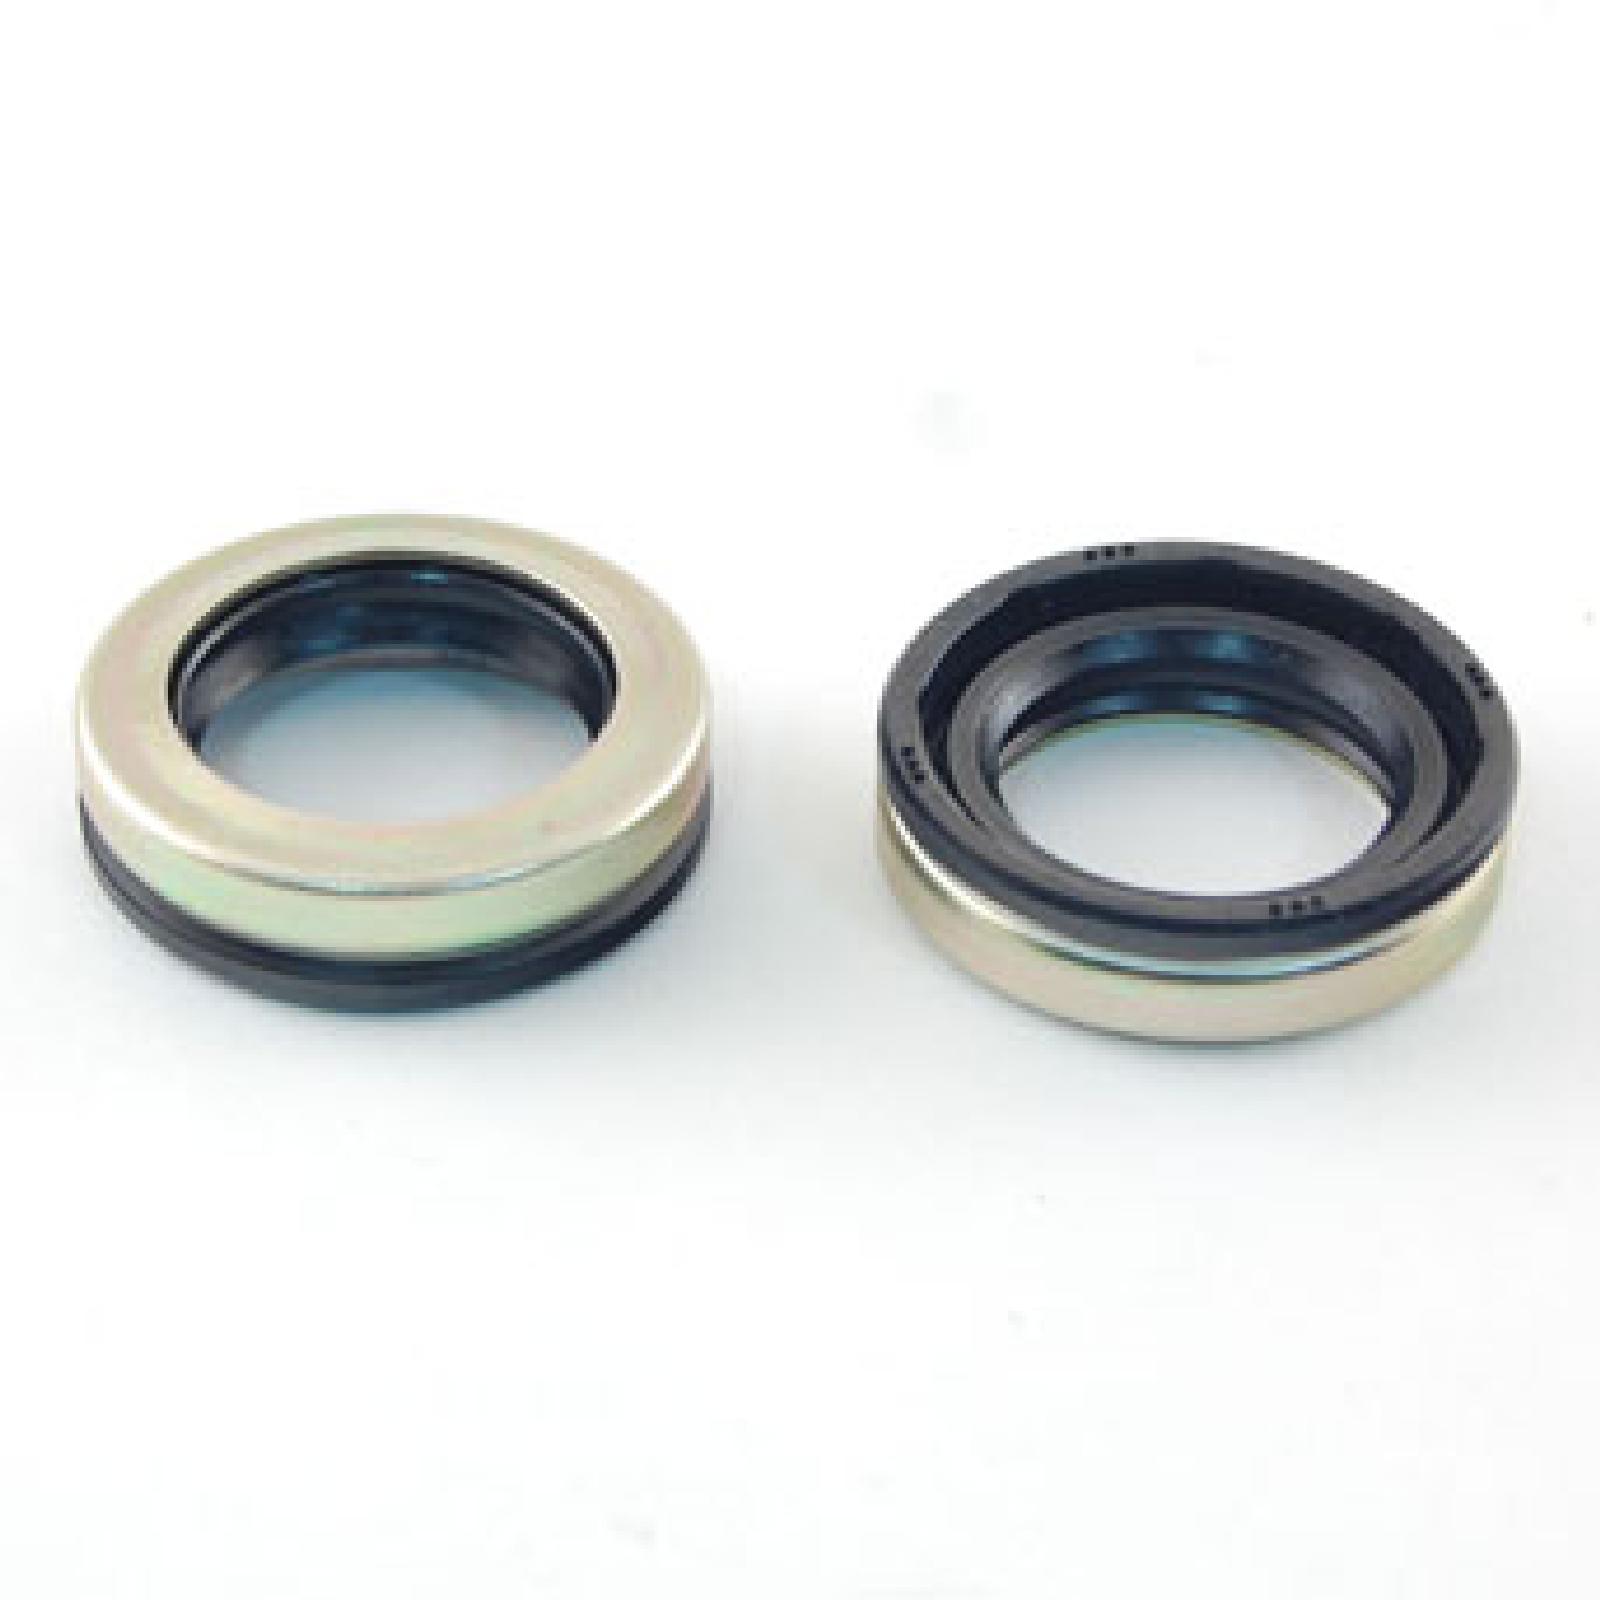 KIT OIL SEAL 12155 part# 1915308 by MTD - Click Image to Close